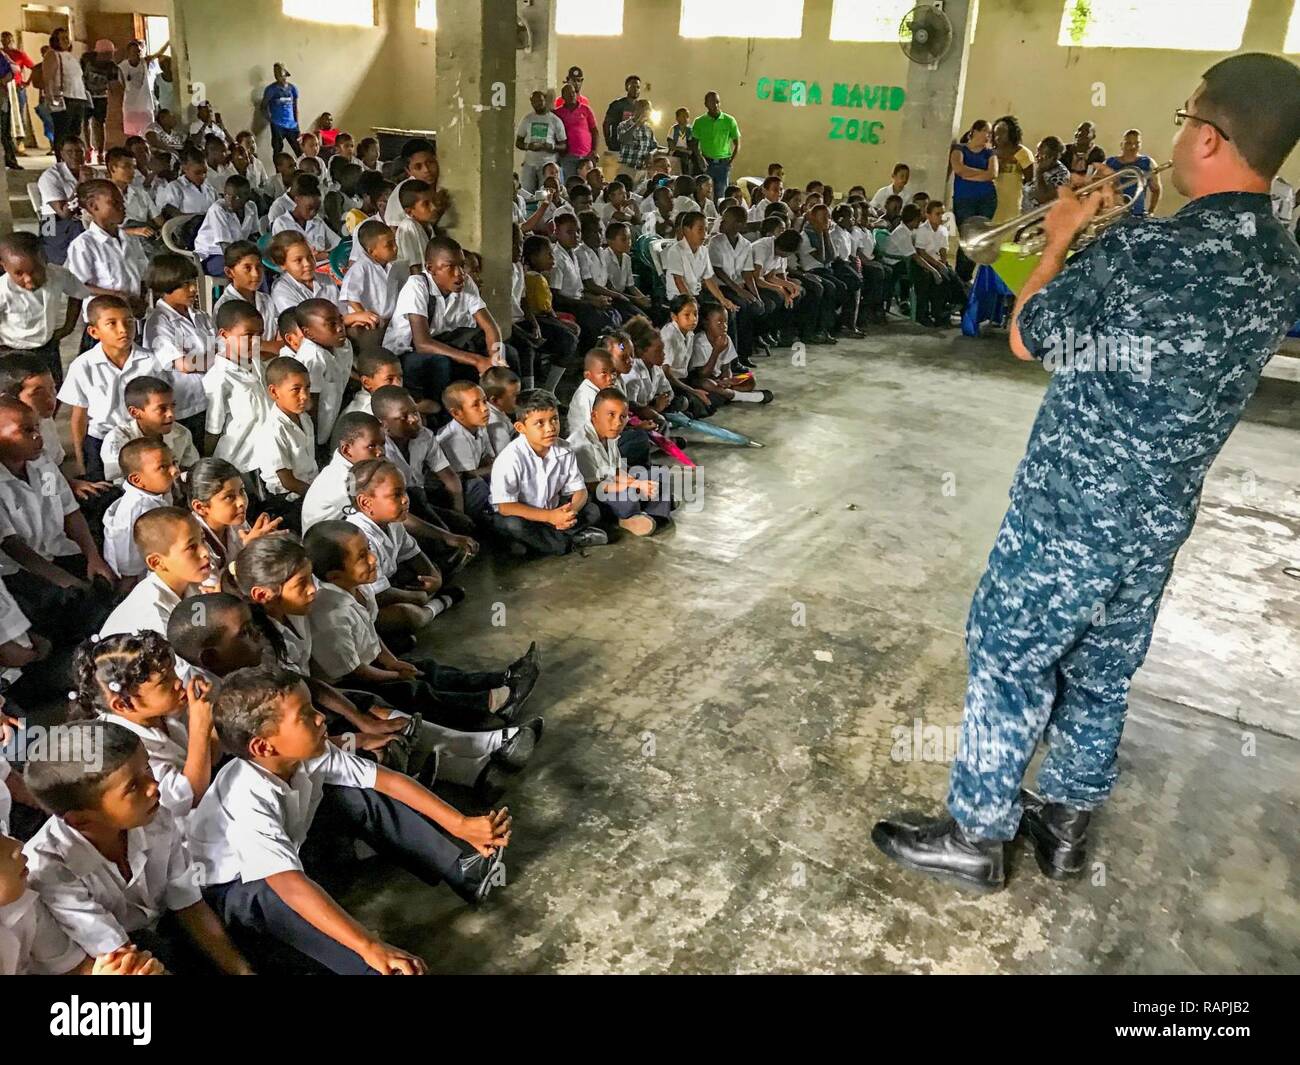 SANTA FE, Honduras (Feb. 22, 2017) – Musician 2nd Class Matthew Kinnaman, a native of Phoenix assigned to the U.S. Fleet Forces FF) Band, Norfolk, Va., plays the trumpet for host nation school children in support of Continuing Promise 2017’s (CP-17) visit to Trujillo, Honduras. CP-17 is a U.S. Southern Command-sponsored and U.S. Naval Forces Southern Command/U.S. 4th Fleet-conducted deployment to conduct civil-military operations including humanitarian assistance, training engagements, and medical, dental, and veterinary support in an effort to show U.S. support and commitment to Central and S Stock Photo